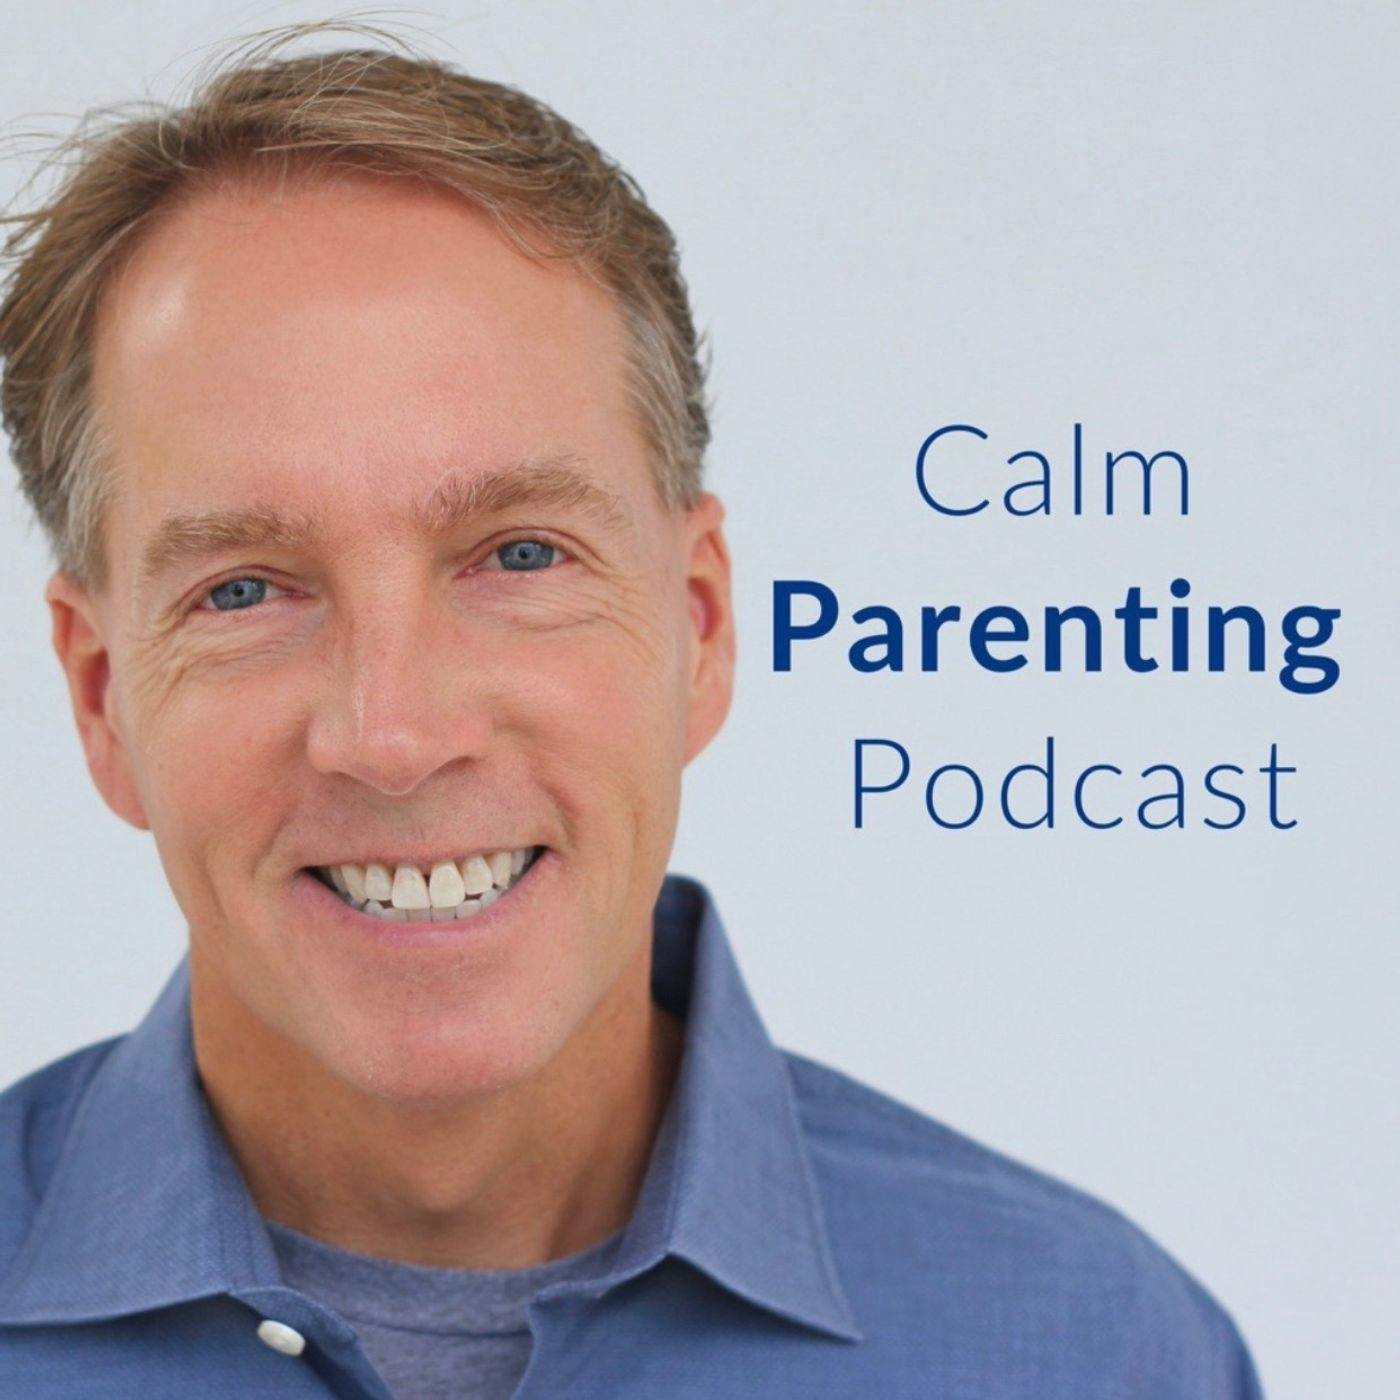 How To Be A Dad Your Kids Listen To by Kirk Martin